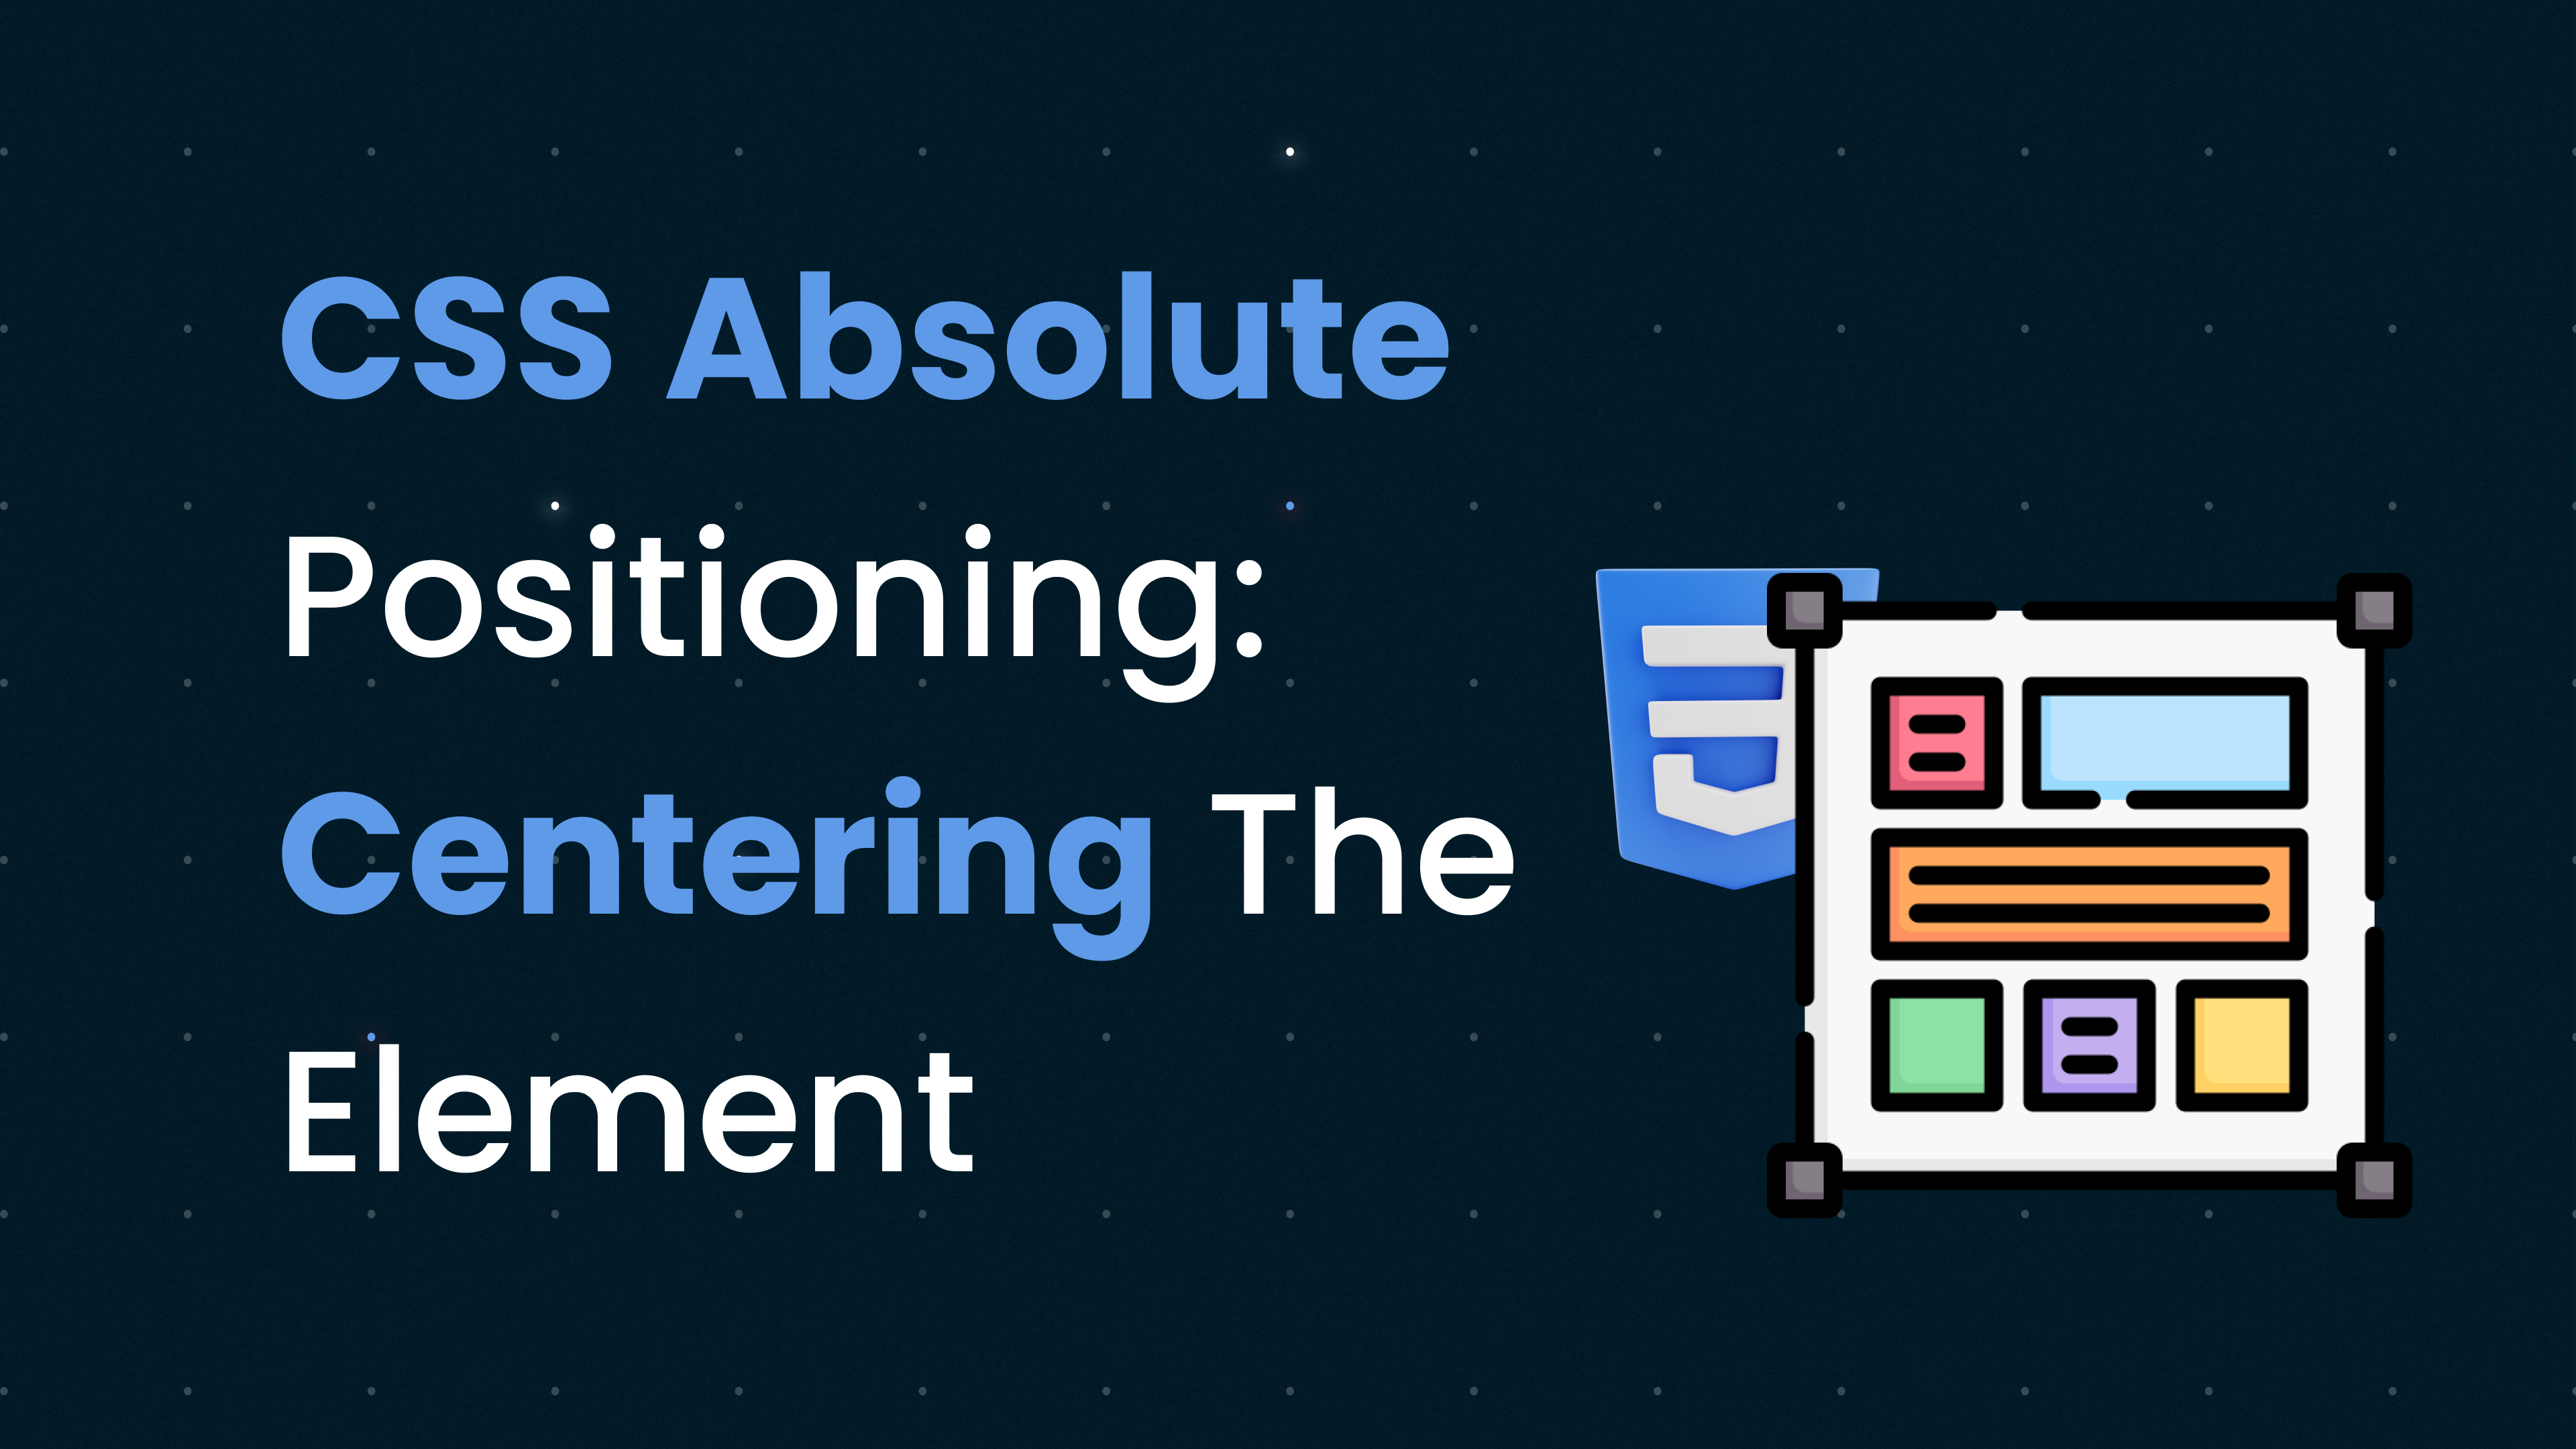 CSS Absolute Positioning: How Translate Works When Centering The Element